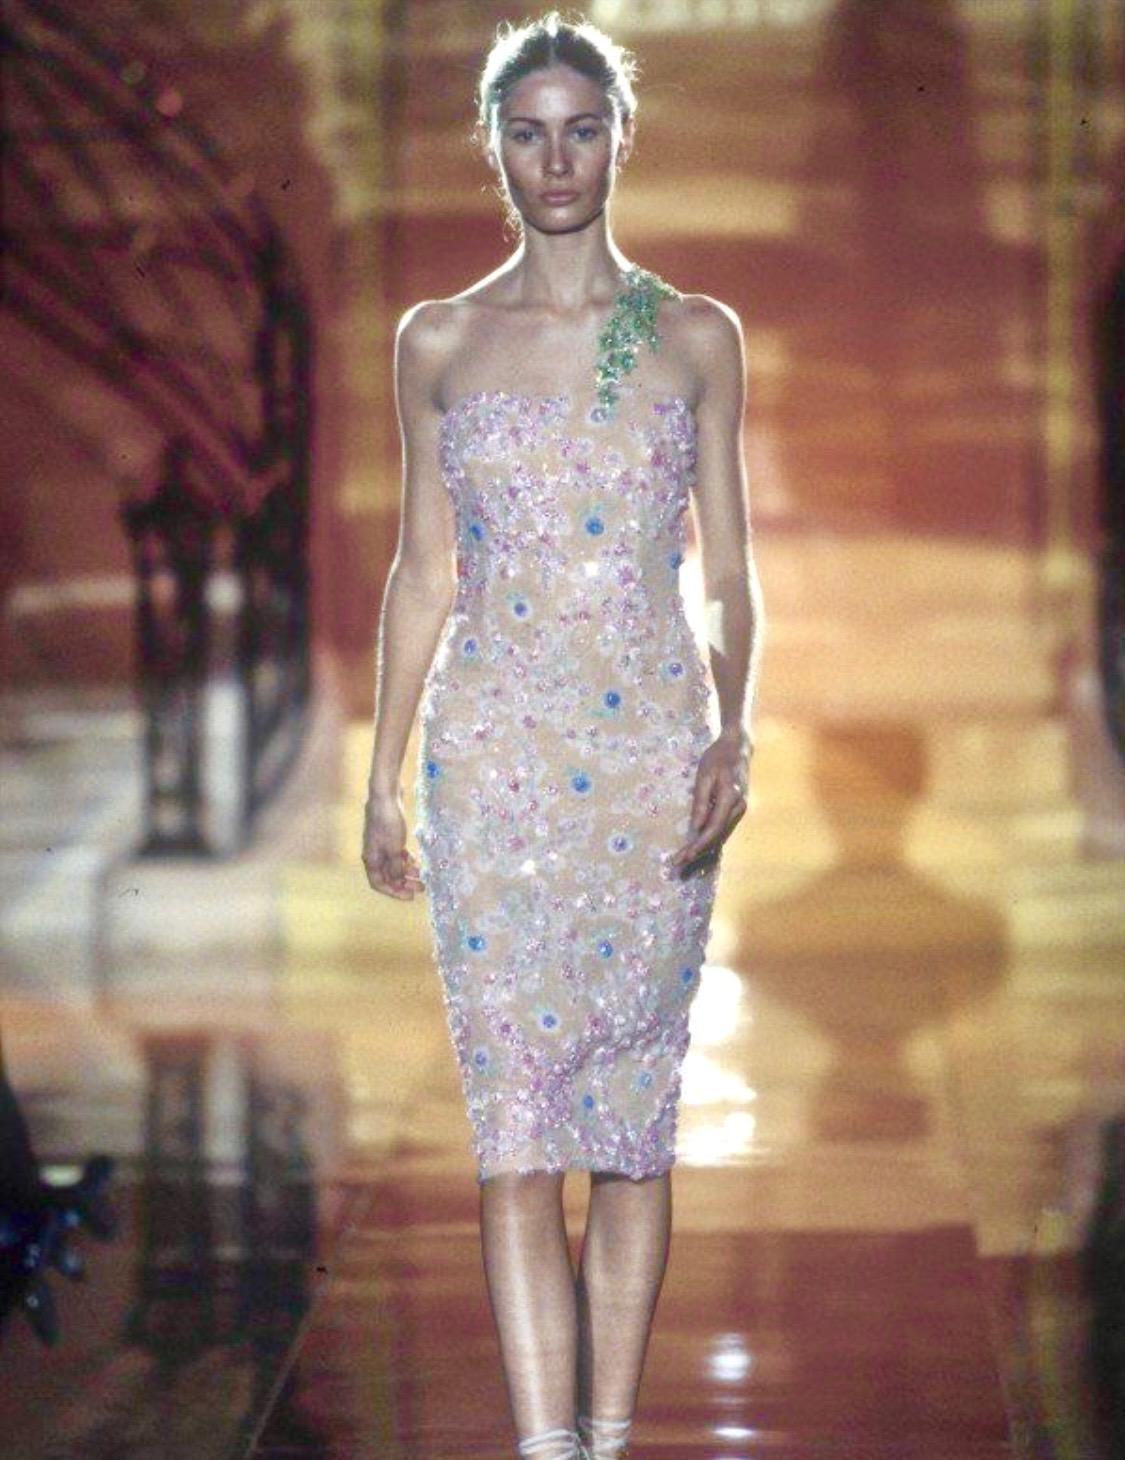 Presenting an intricate Atelier Versace Haute Couture dress, designed by Gianni Versace for his final spring collection before his death. This dress was created for the Spring/Summer 1997 Atelier Versace collection and was featured in the runway